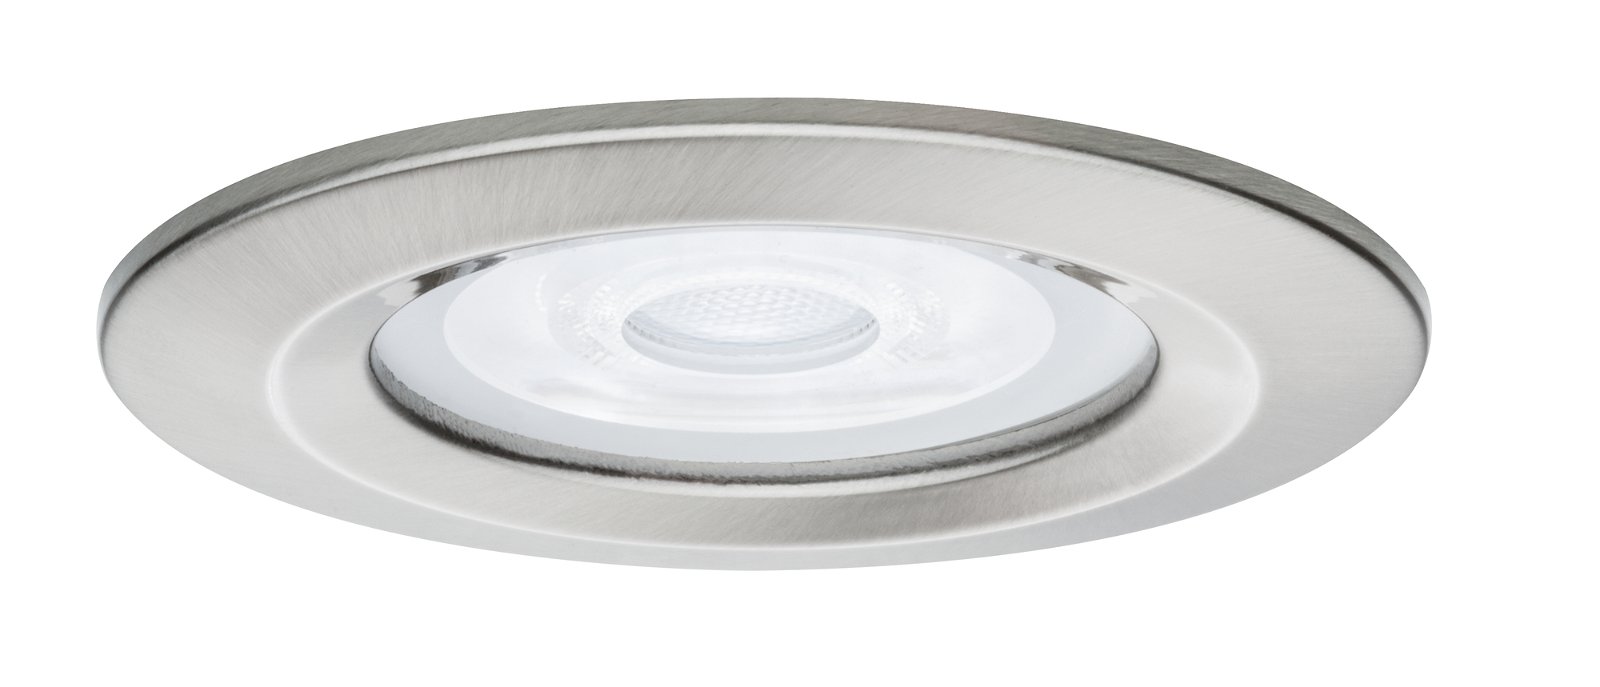 Recessed luminaire Nova Rigid round 78mm GU10 max. 35W 230V dimmable Brushed iron